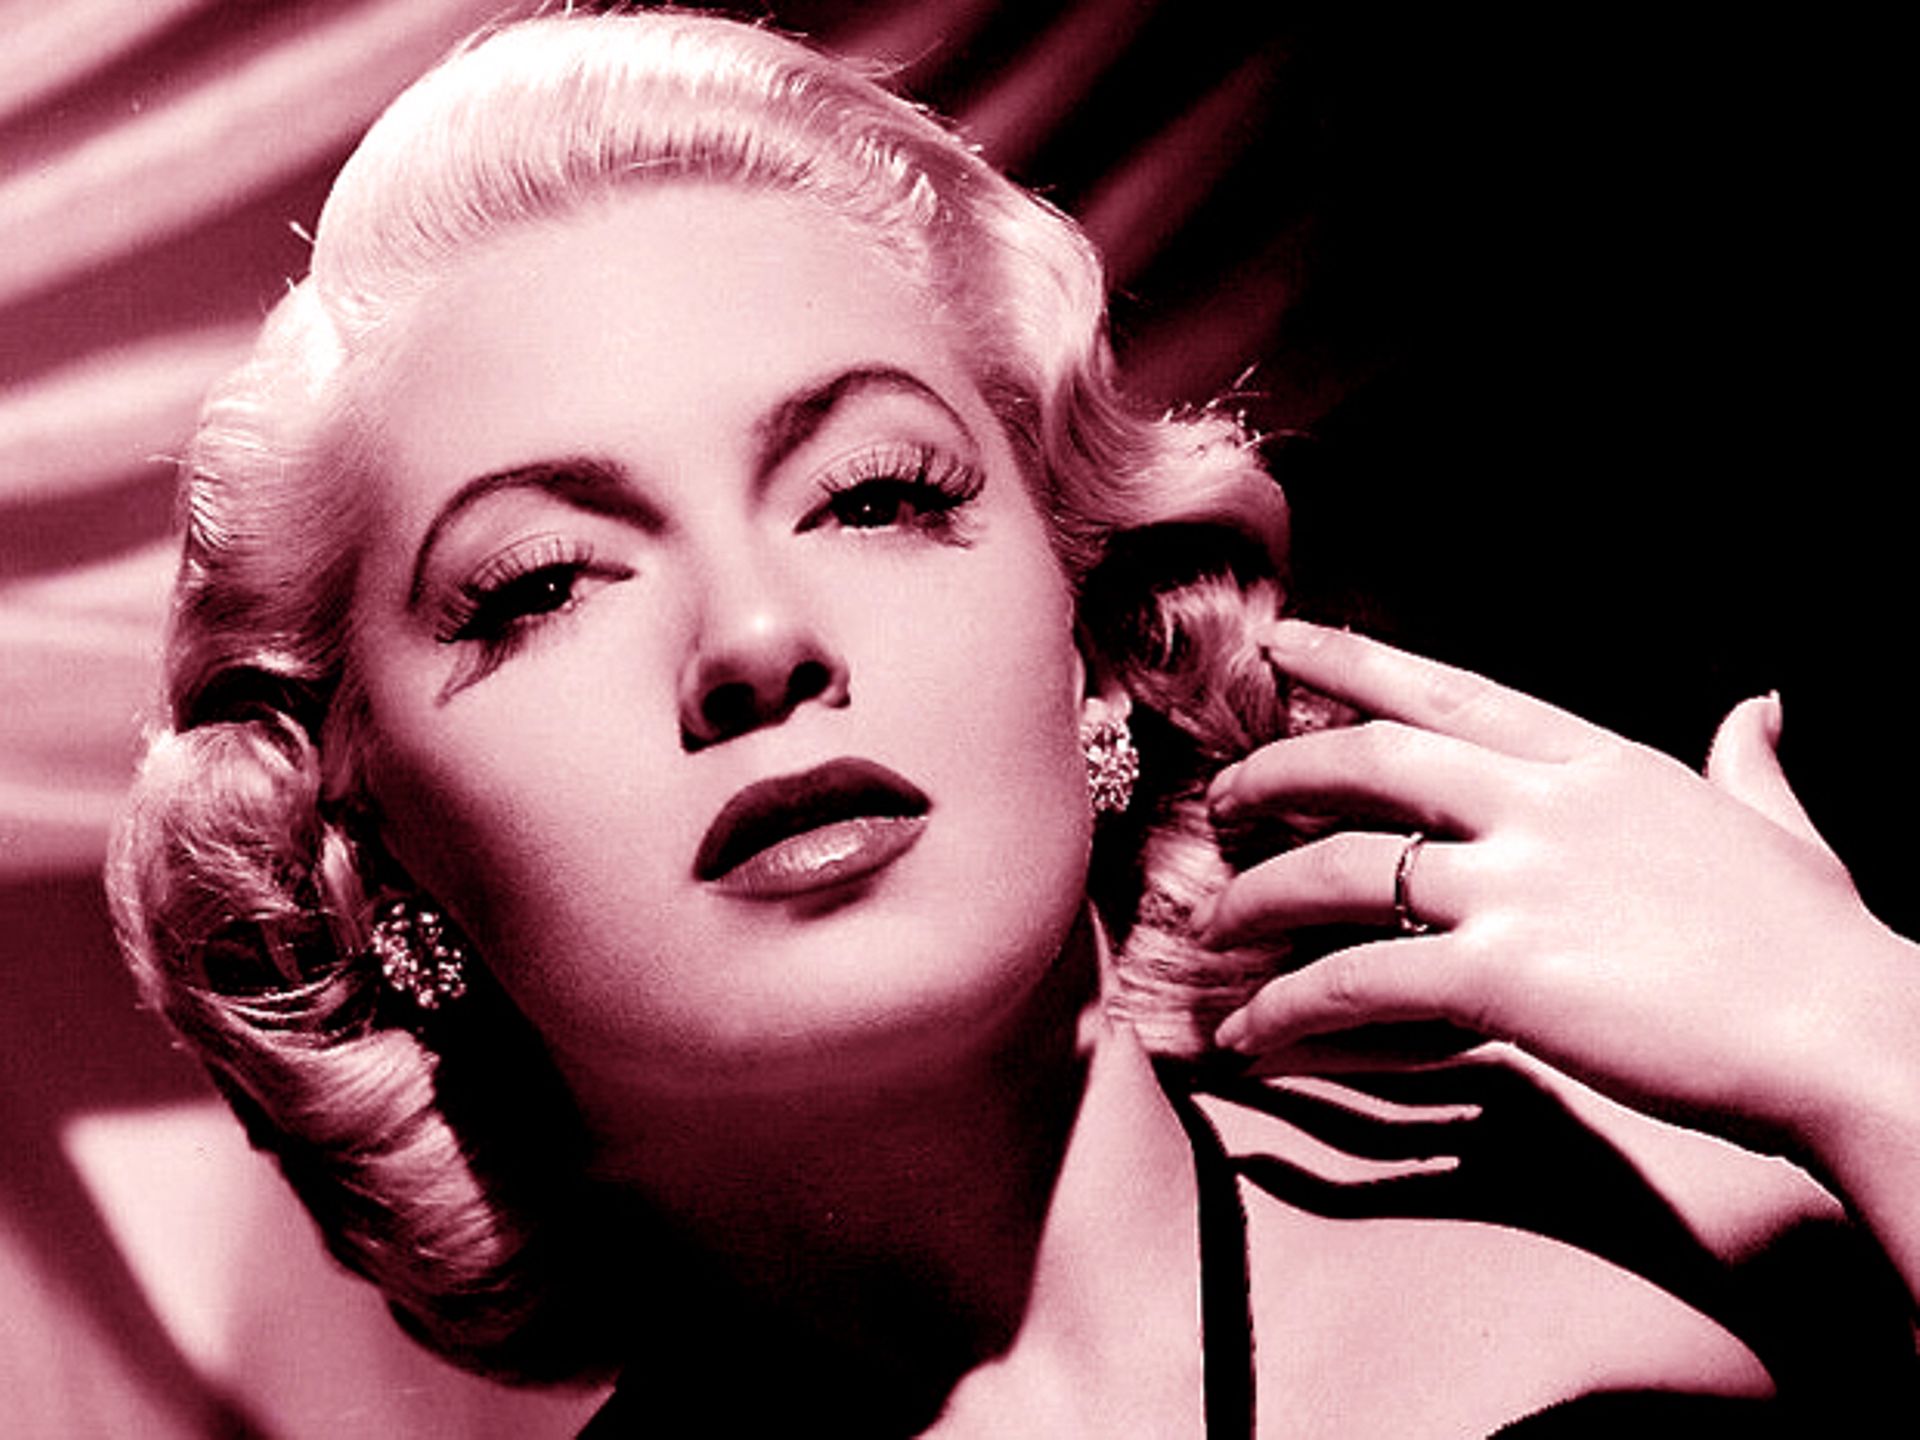 Hollywood Homicide: Lana Turner and the Death of Johnny Stompanato